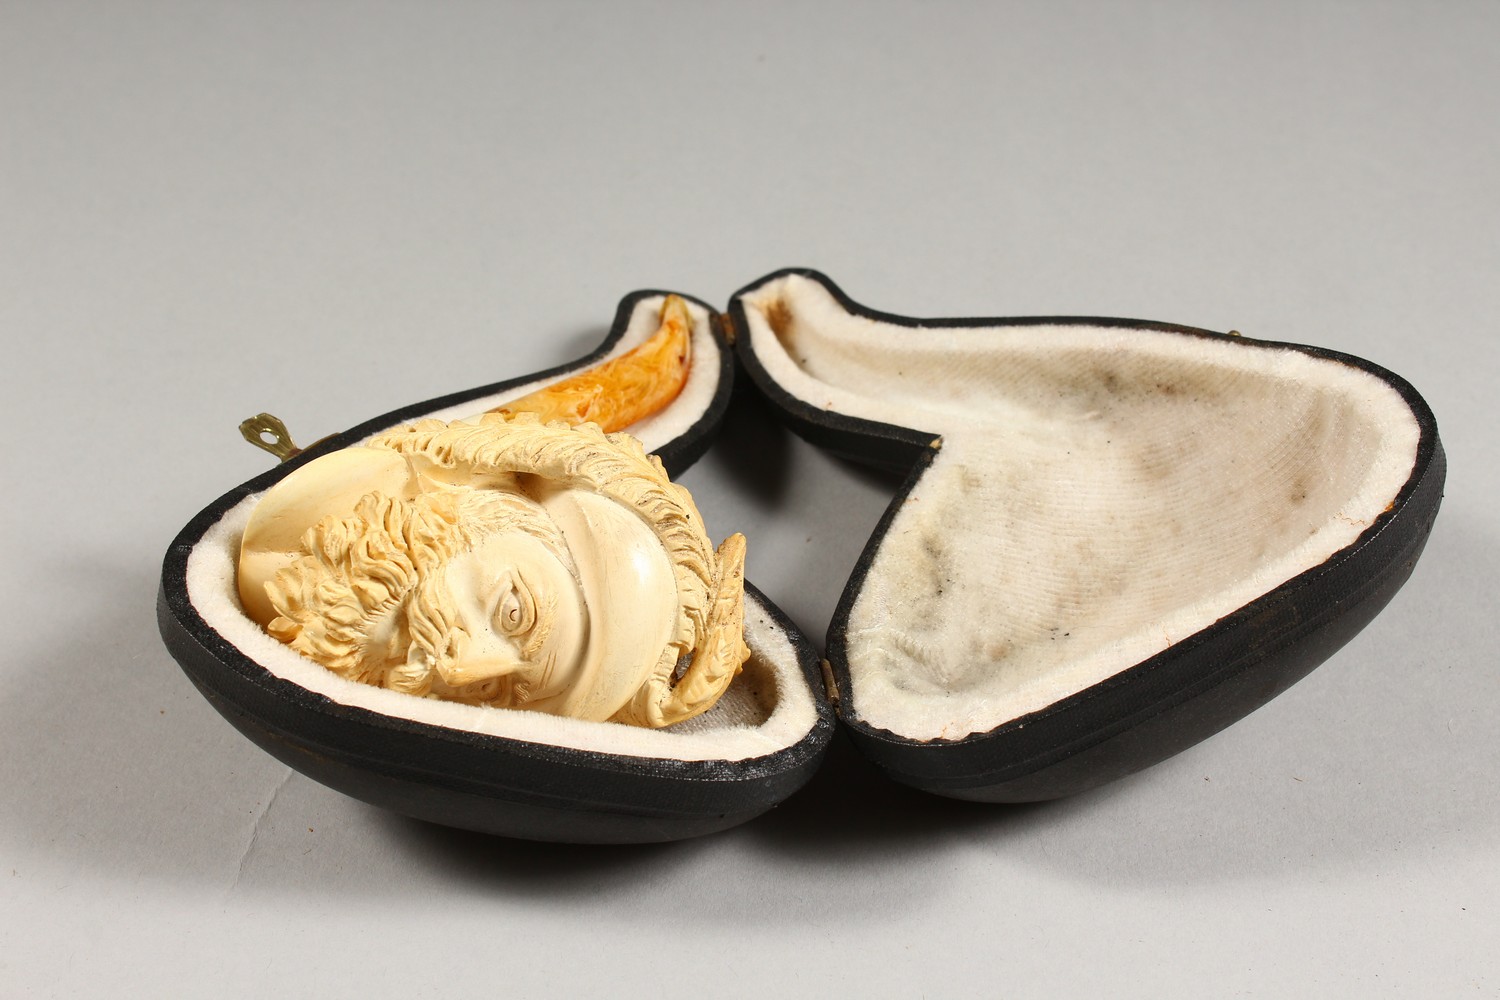 A VERY GOOD MEERSCHAUM PIPE, the bowl modelled as a bearded gentleman, in a fitted case. - Image 13 of 14